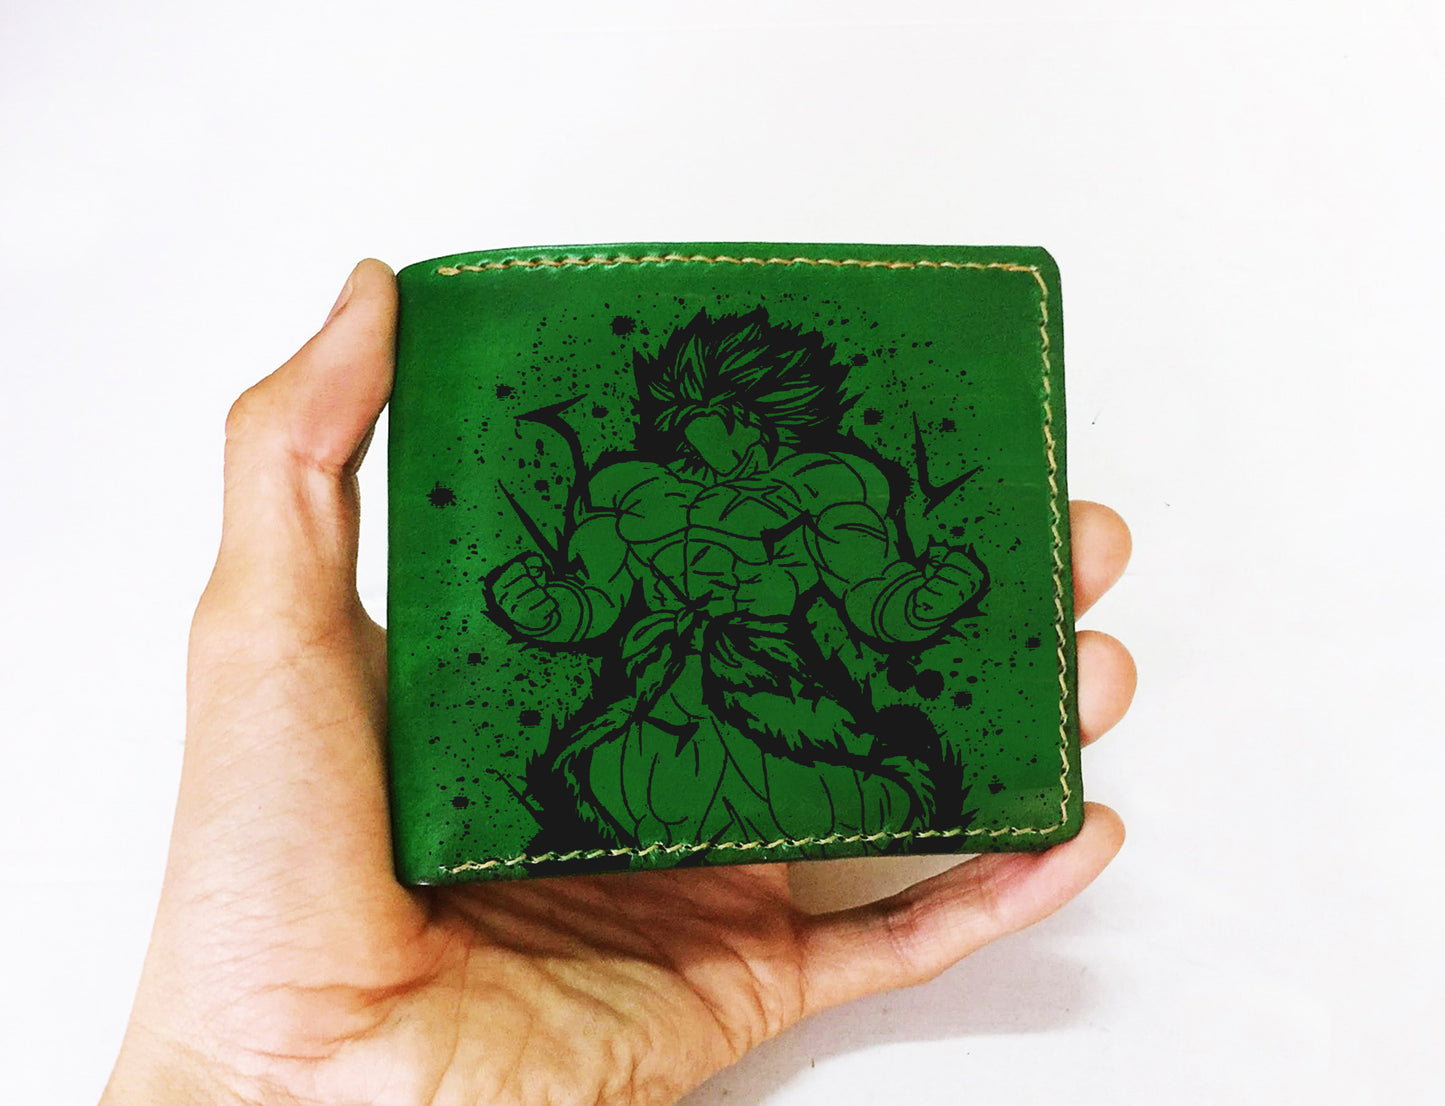 Mayan Corner - Dragon ball characters leather handmade wallet, Beerus God leather gift, customized gift for boyfriend, birthday anniversary present